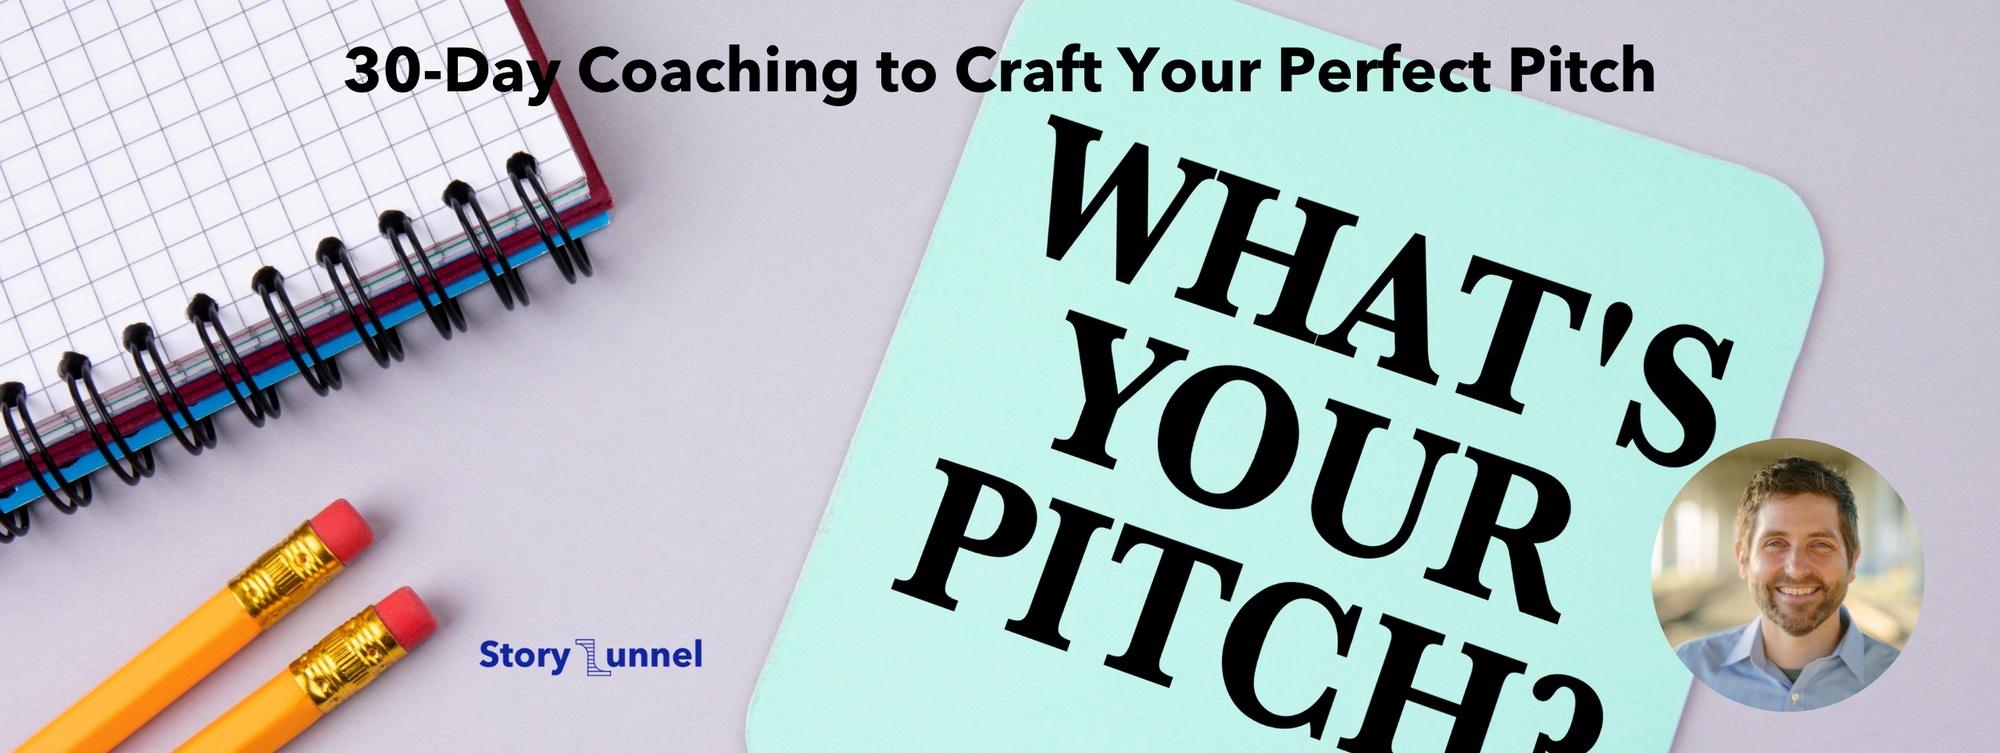 30-Day Coaching: Crafting Your Perfect Pitch